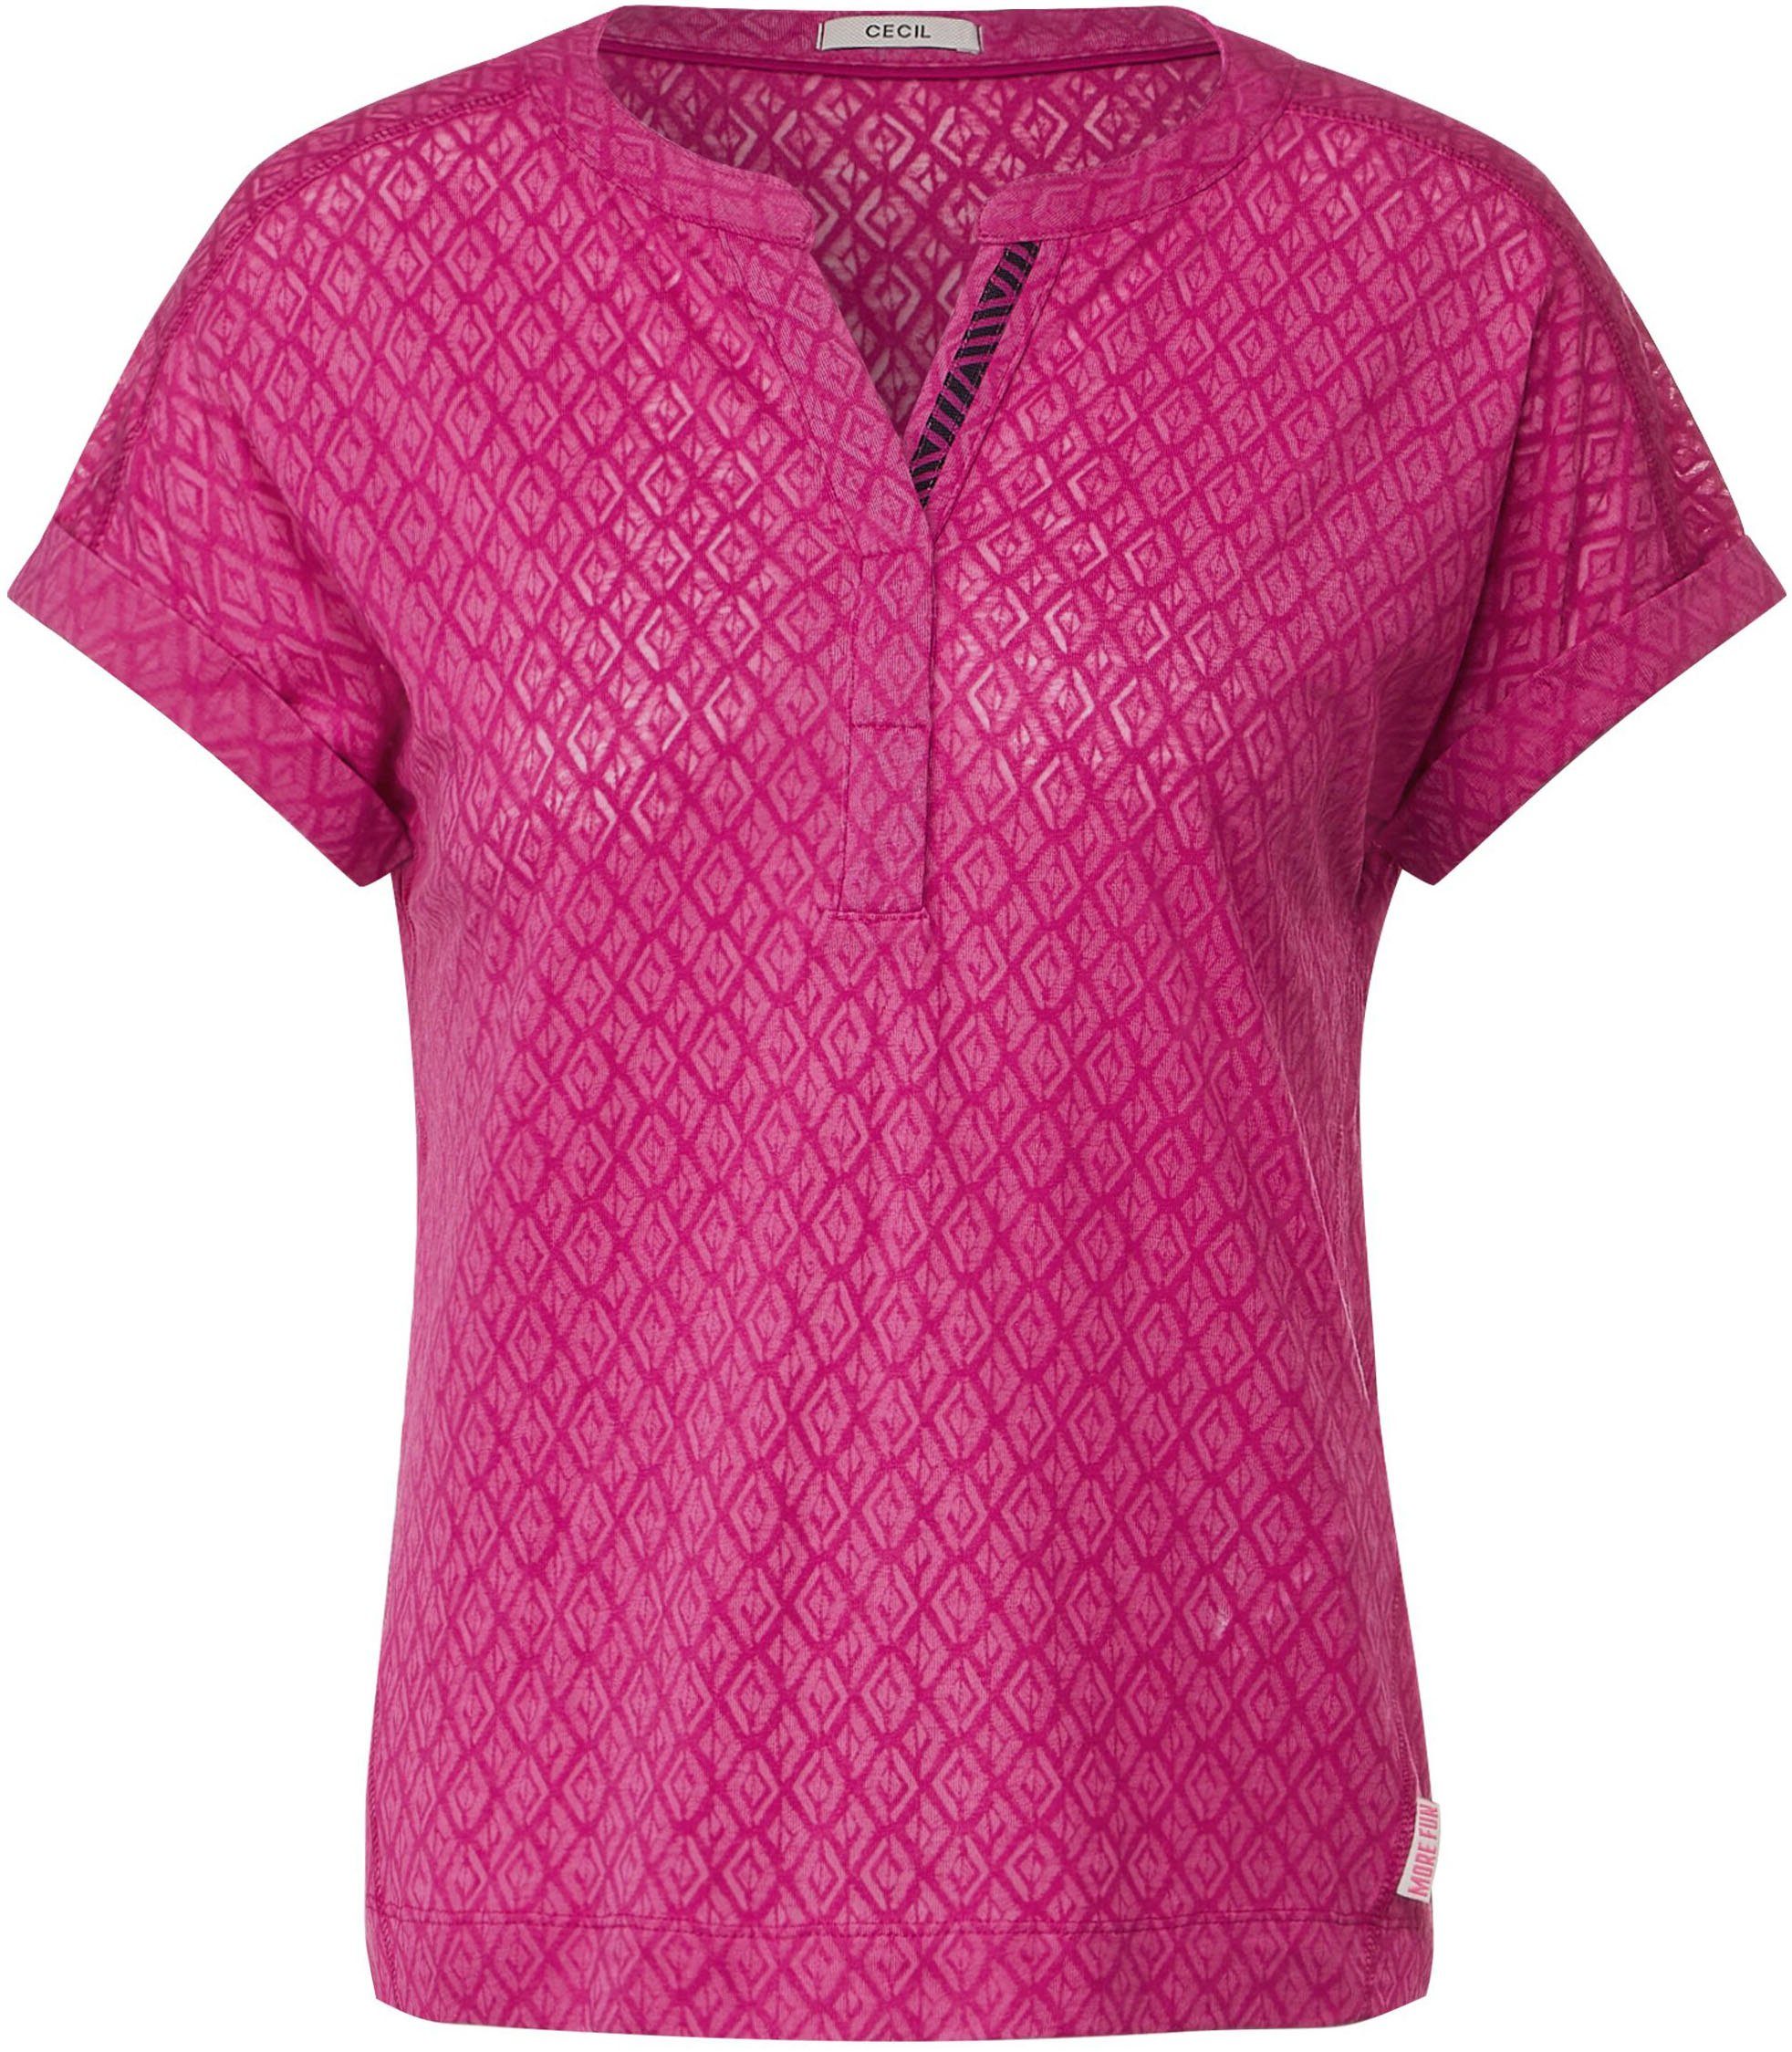 cool Cecil in T-Shirt Rhombusform pink mit Allover-Muster